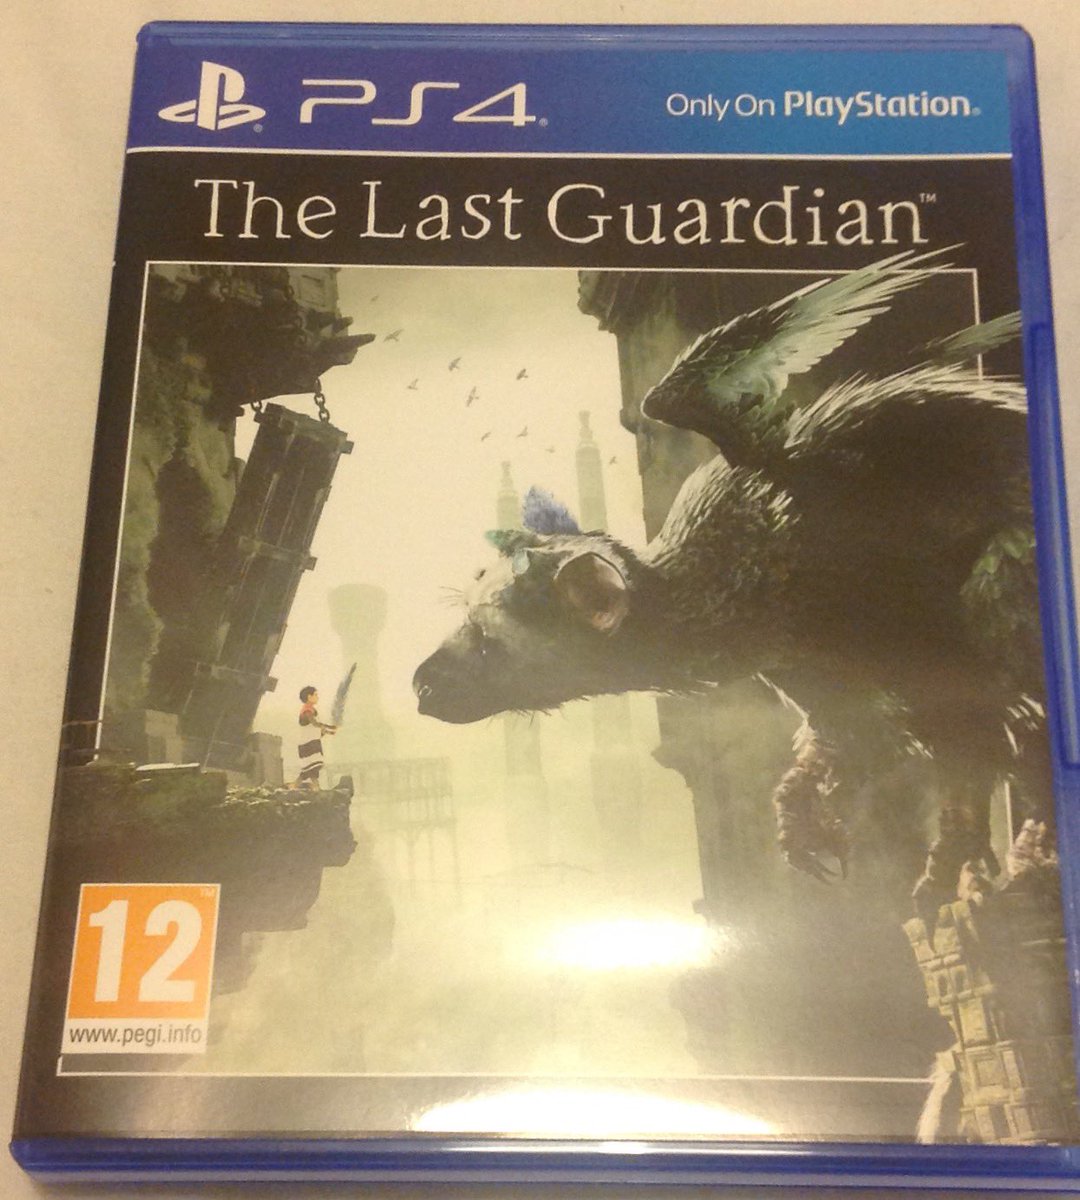 Such a fantastic and gorgeous game ❤️😍 #PS4 #gaming #gamers #GamersUnite #shareyourgames #TheLastGuardian ❤️😍